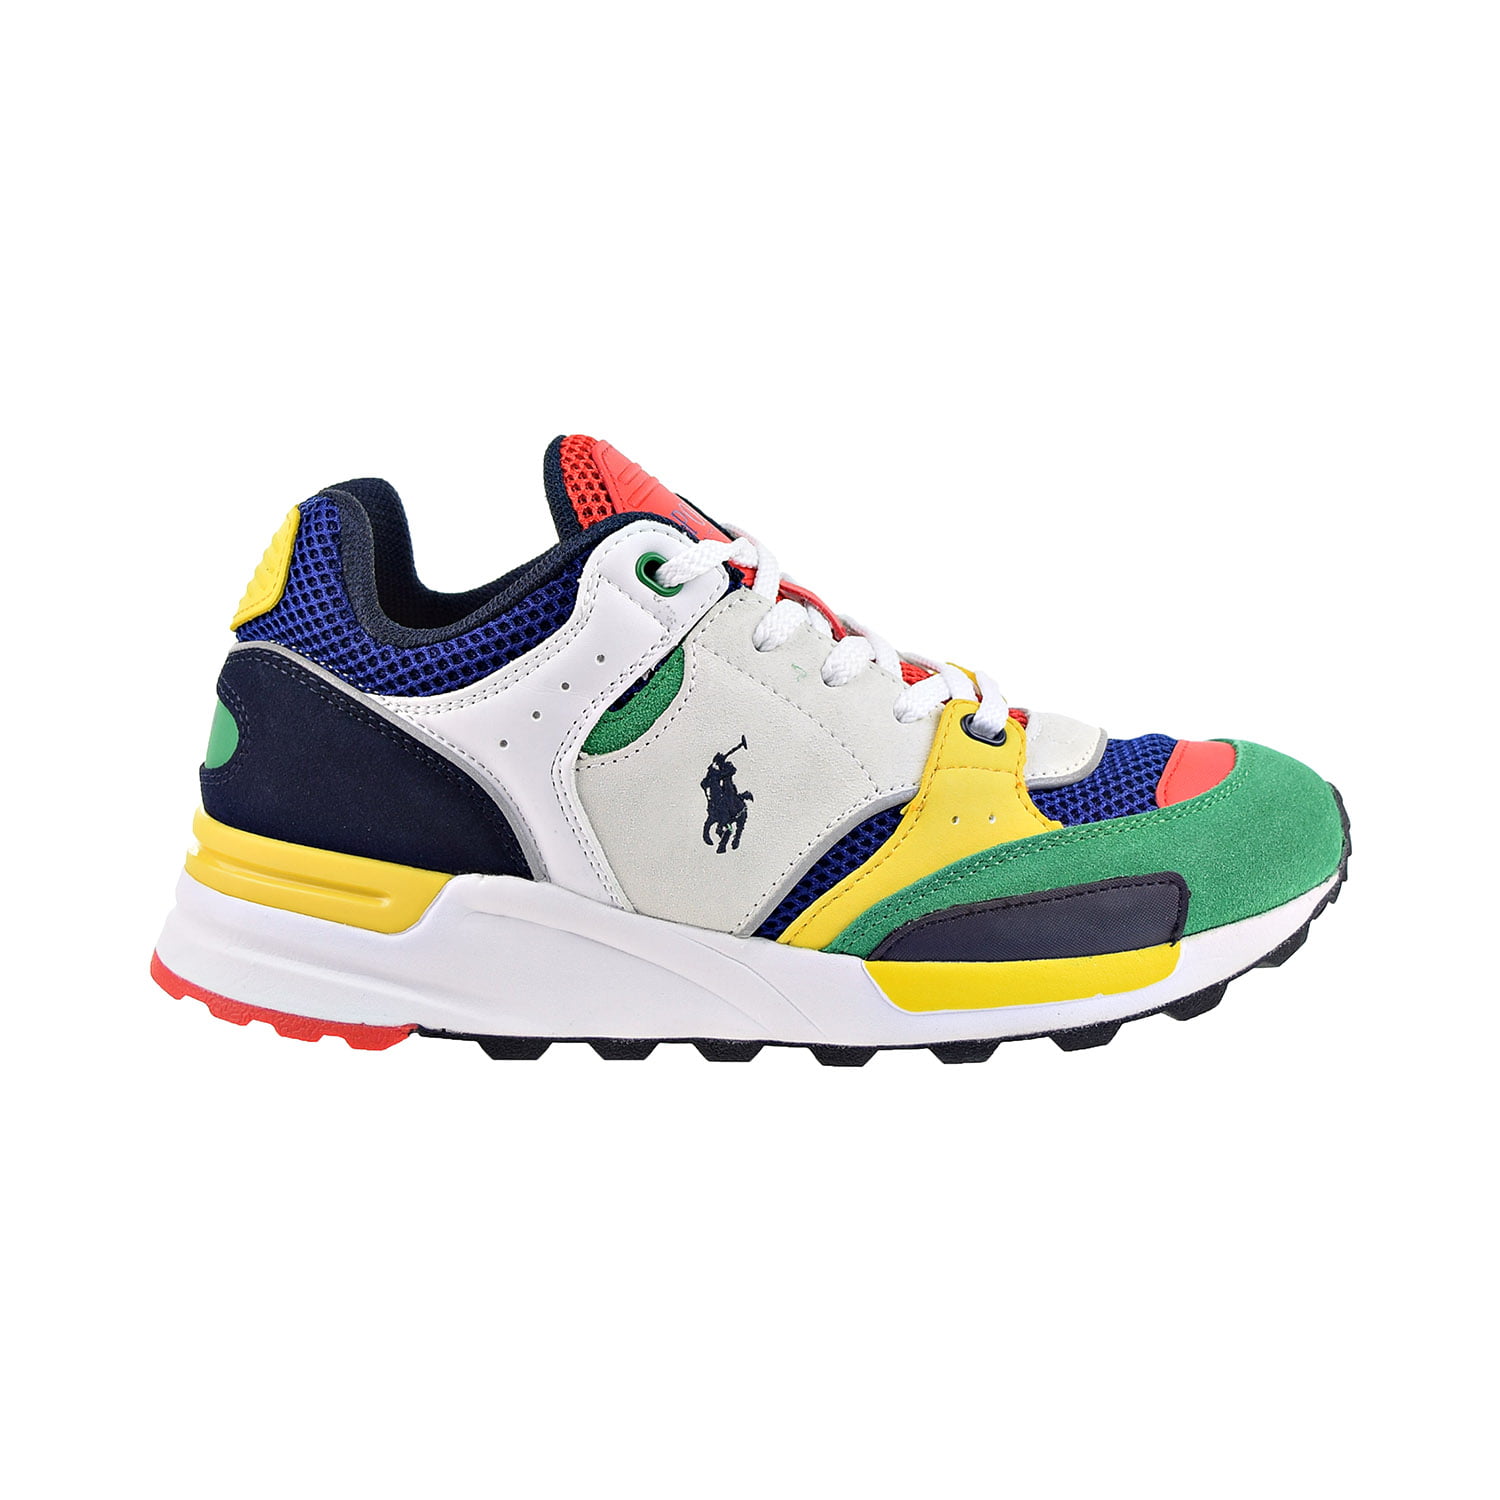 Polo Ralph Lauren Trackster 200 Sneaker Men's Shoes White/Red/Yellow ...